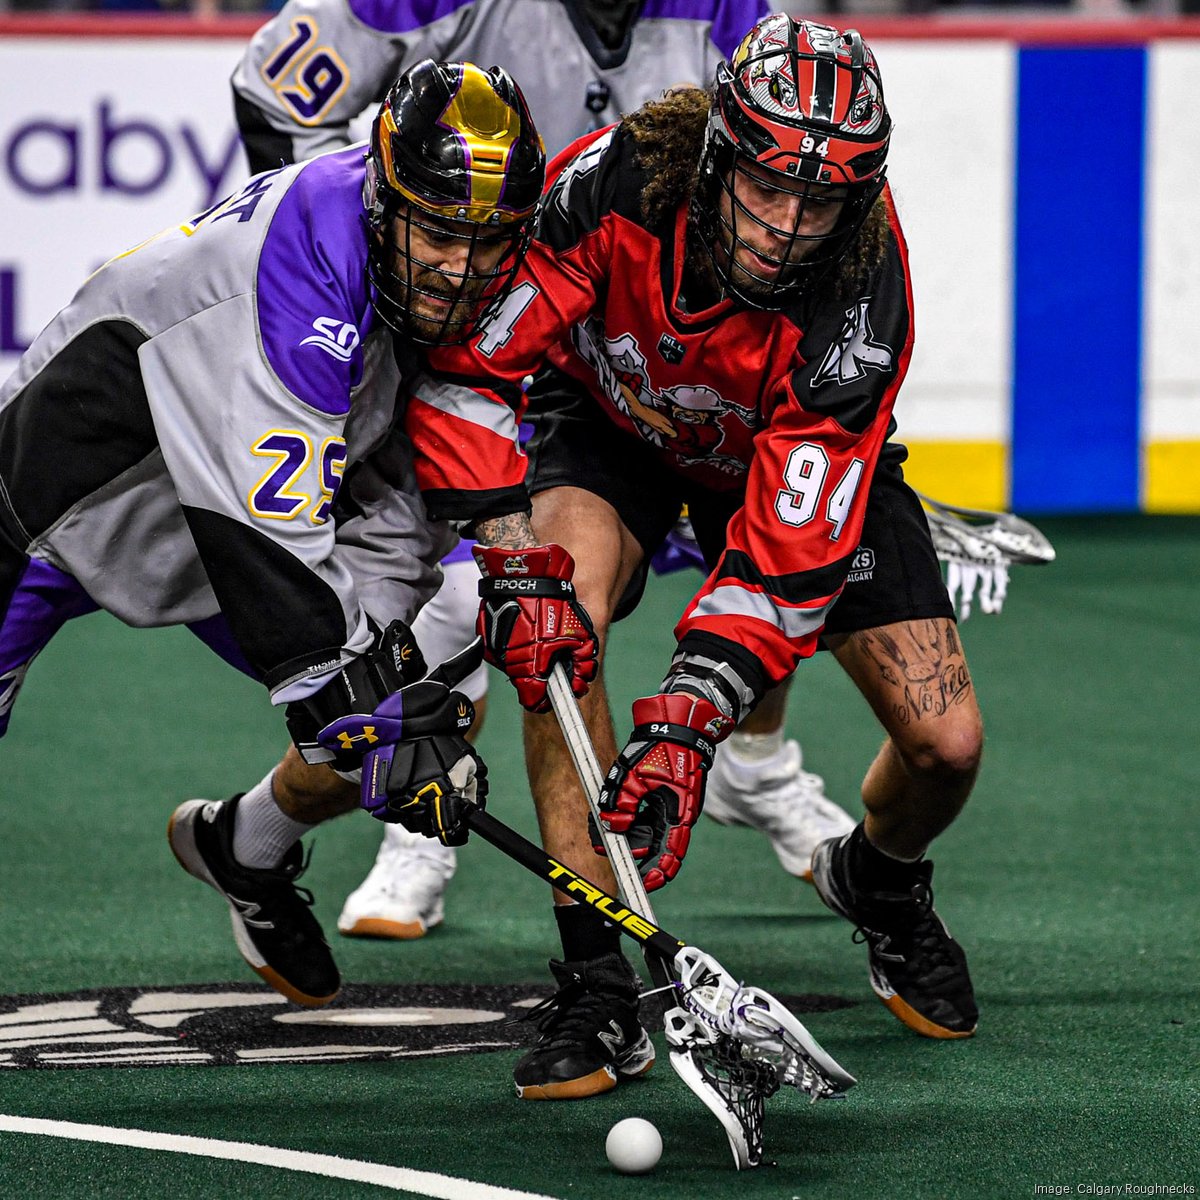 National Lacrosse League, local ownership group announce new Fort